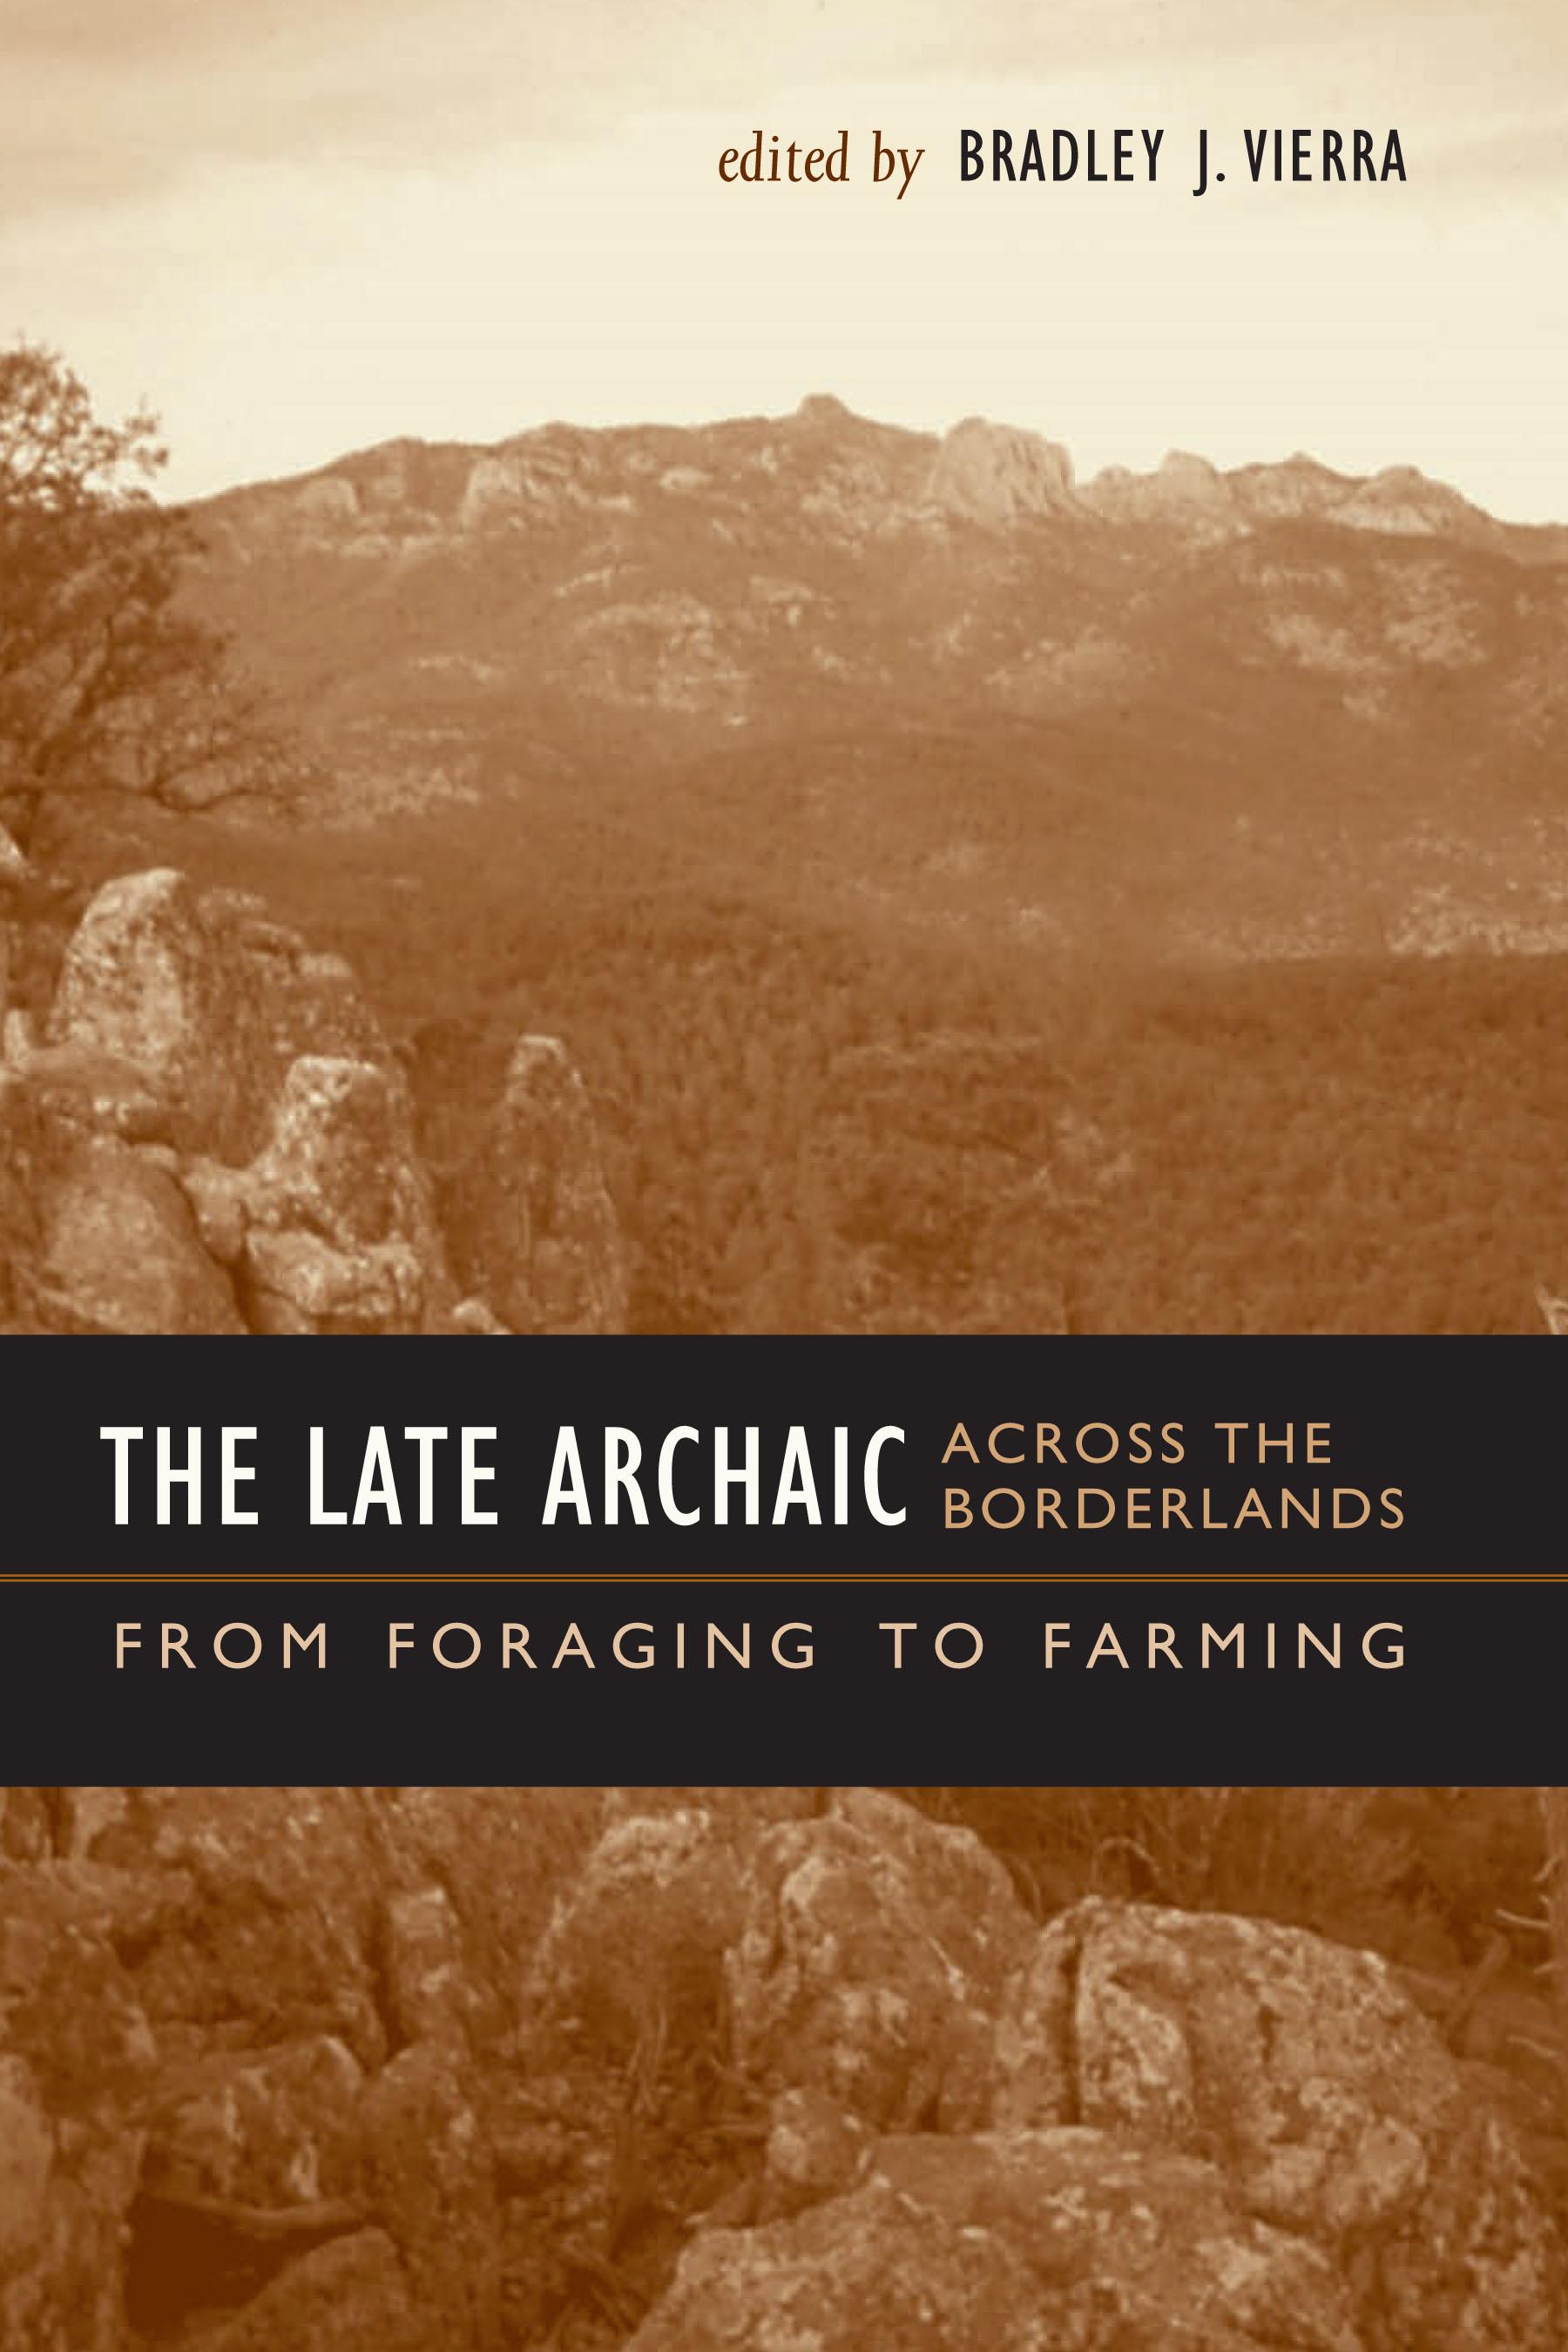 The Late Archaic across the Borderlands